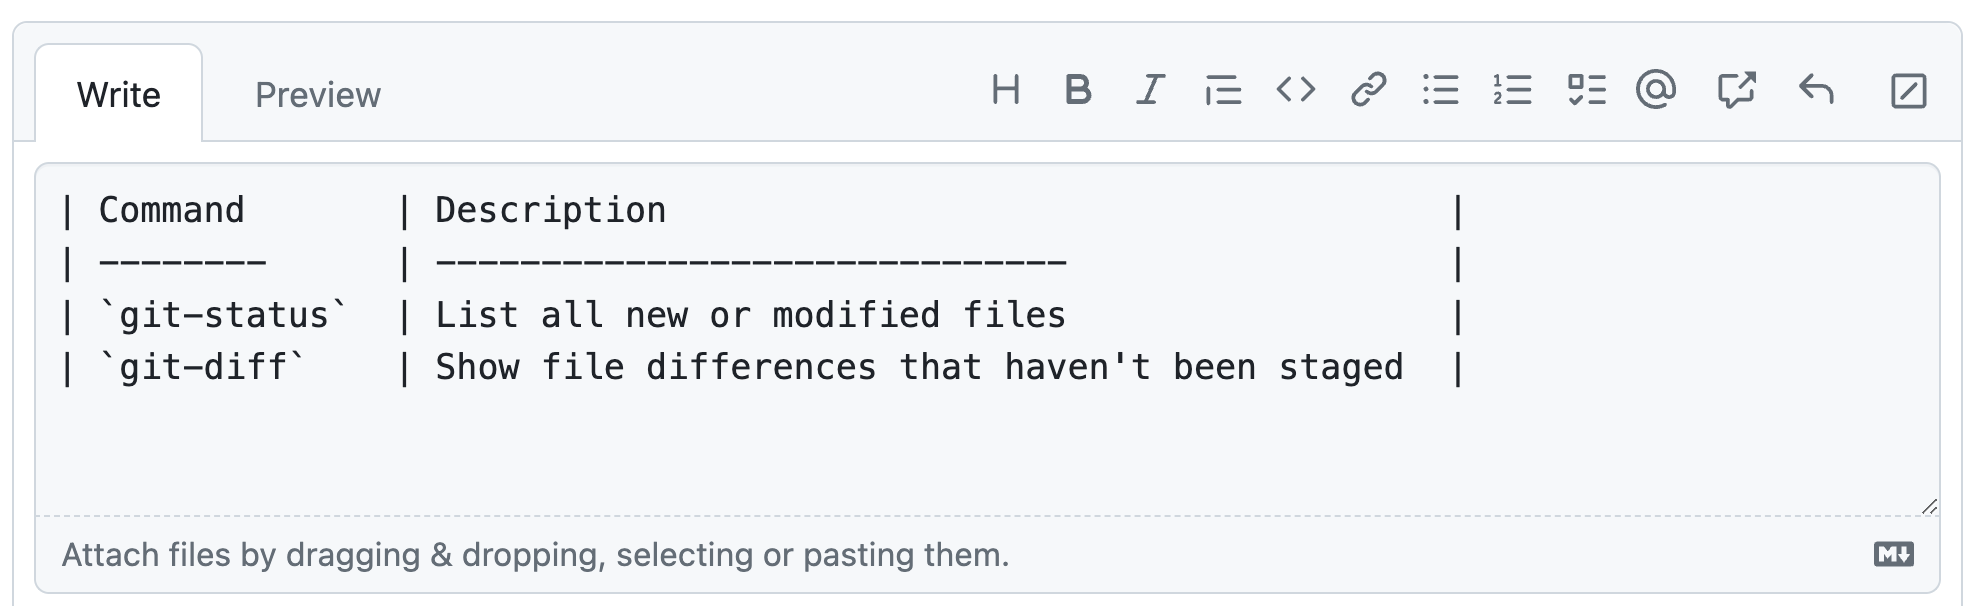 Screenshot showing the GitHub AE comment field with fixed-width fonts enabled